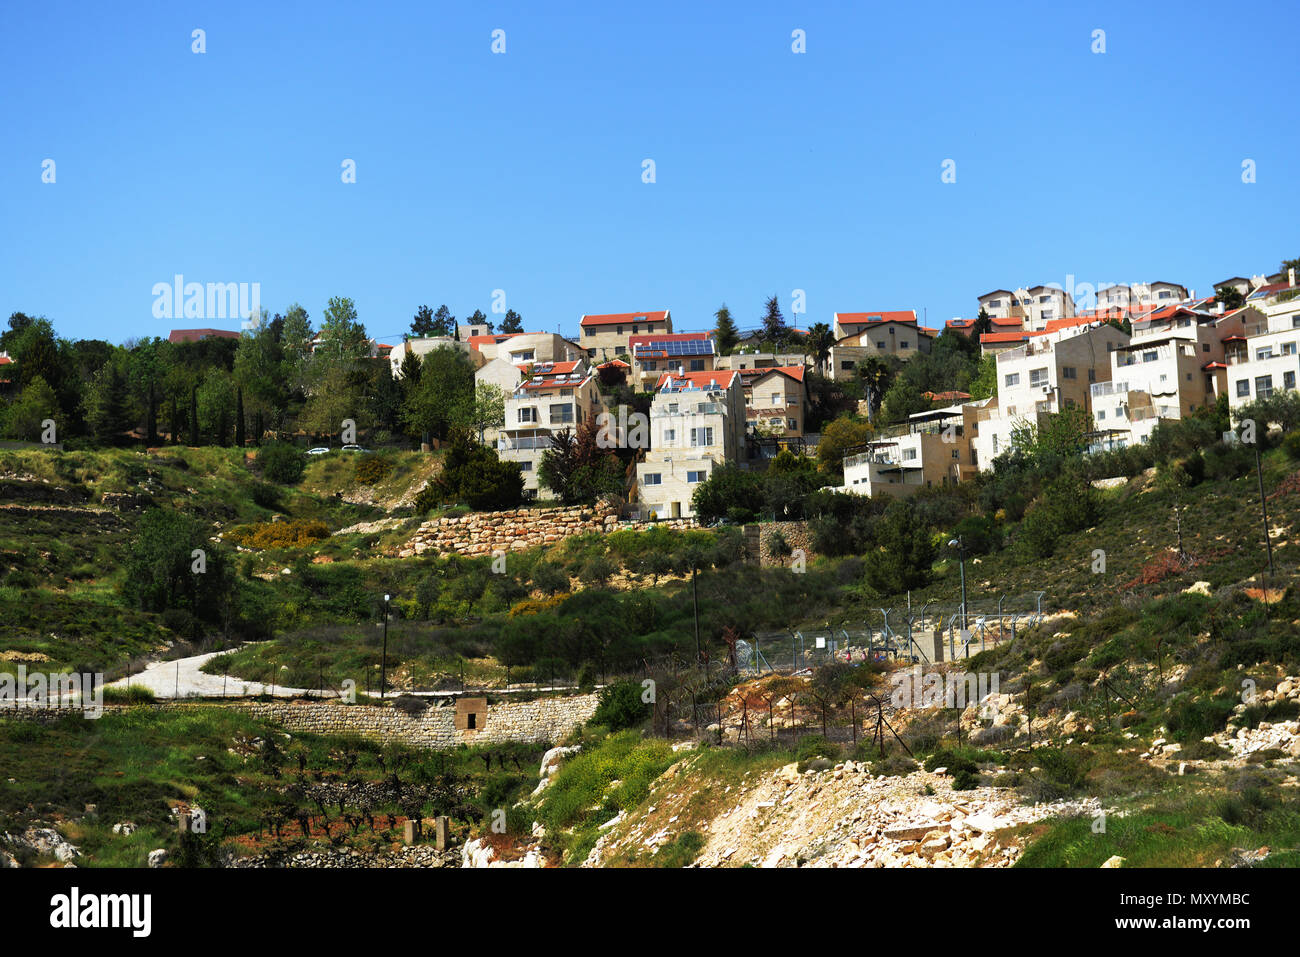 Jewish settlements and towns in the West Bank. Stock Photo